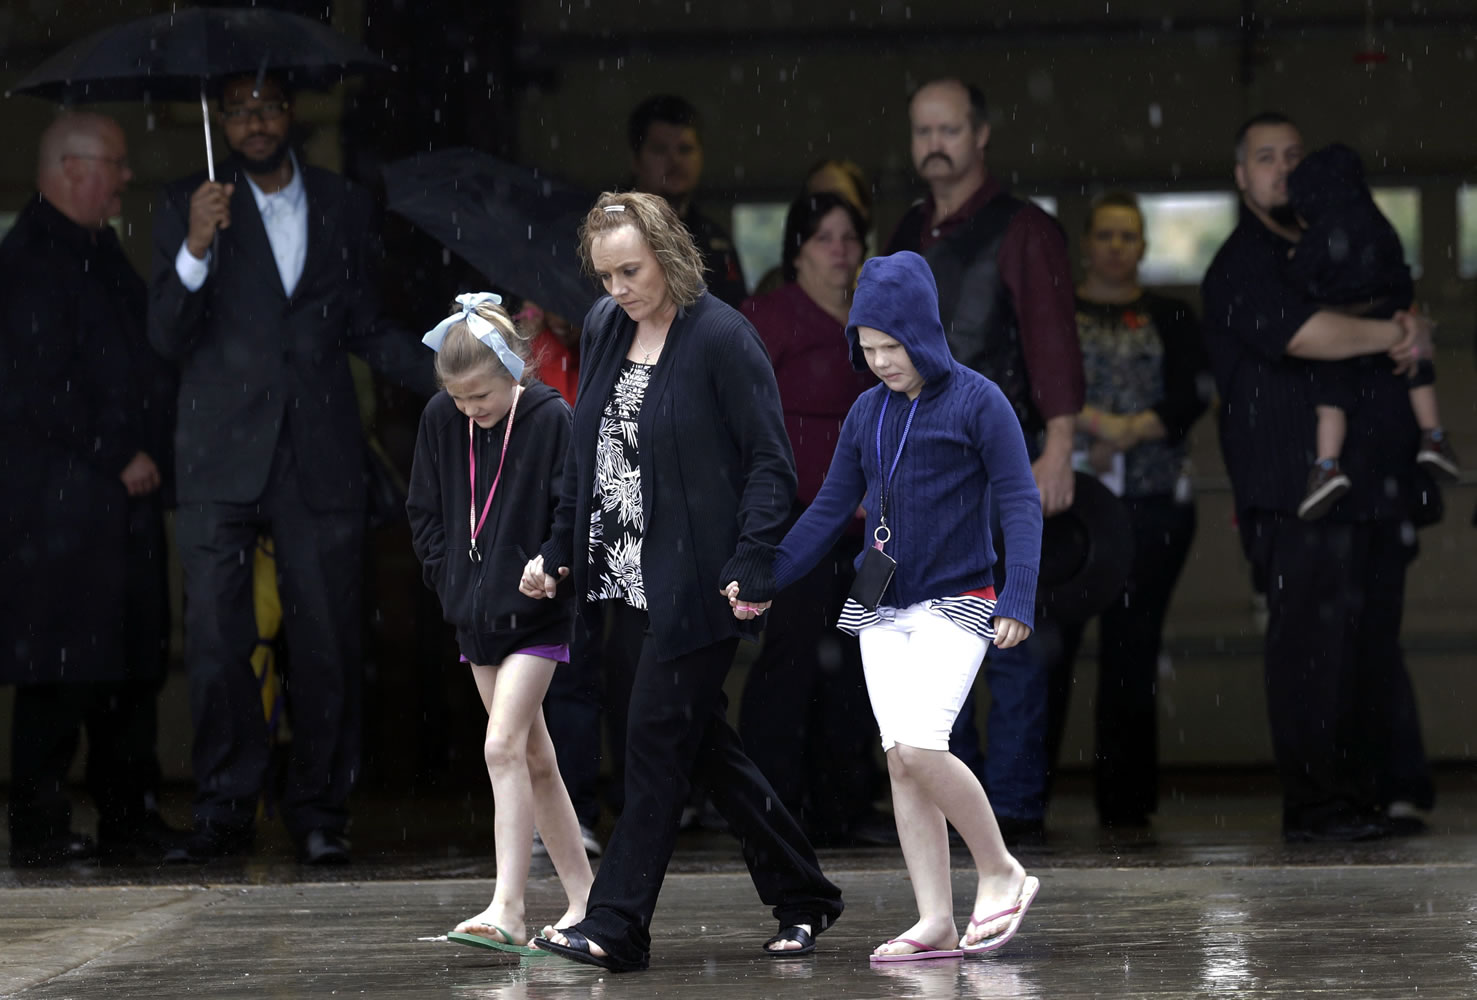 Mourners leave a funeral service for Antonia Calendaria, 9, a student at Towers Plaza Elementary school who was killed by Monday's tornado Thursday in Oklahoma City, Okla.